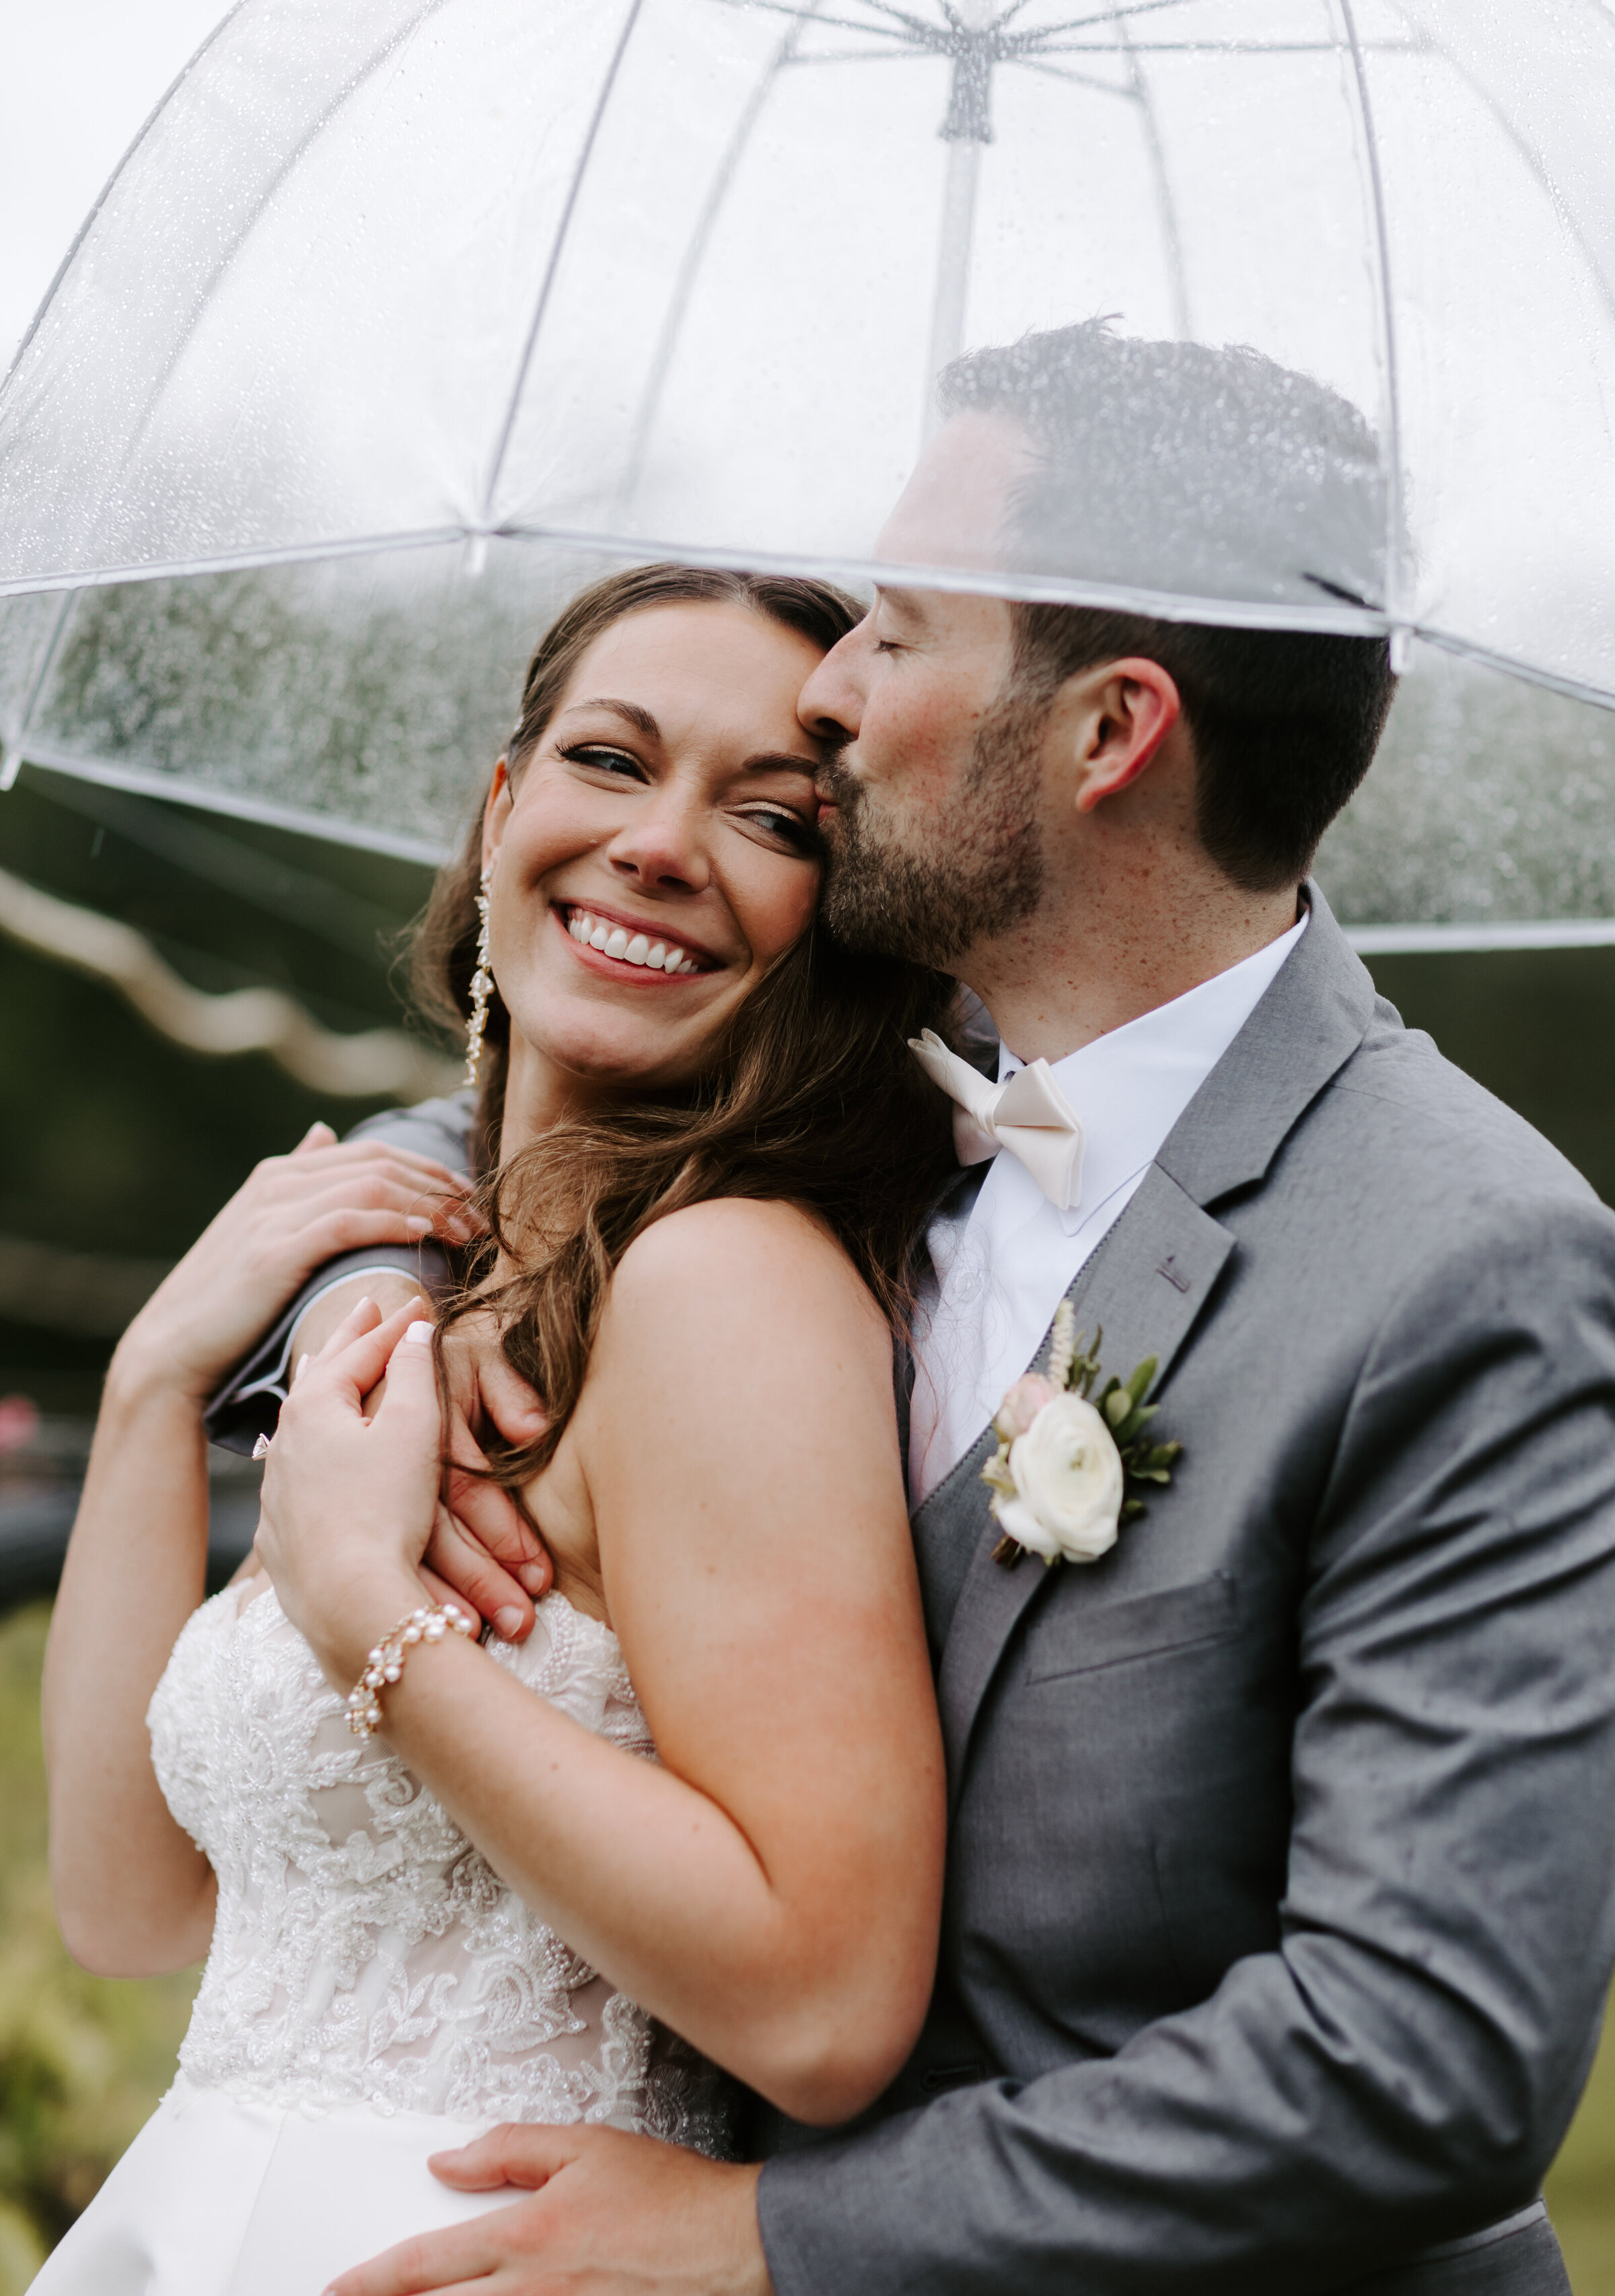 Bride leans into groom under umbrella during rainy wedding at Labelle Winery in Amherst, New Hampshire